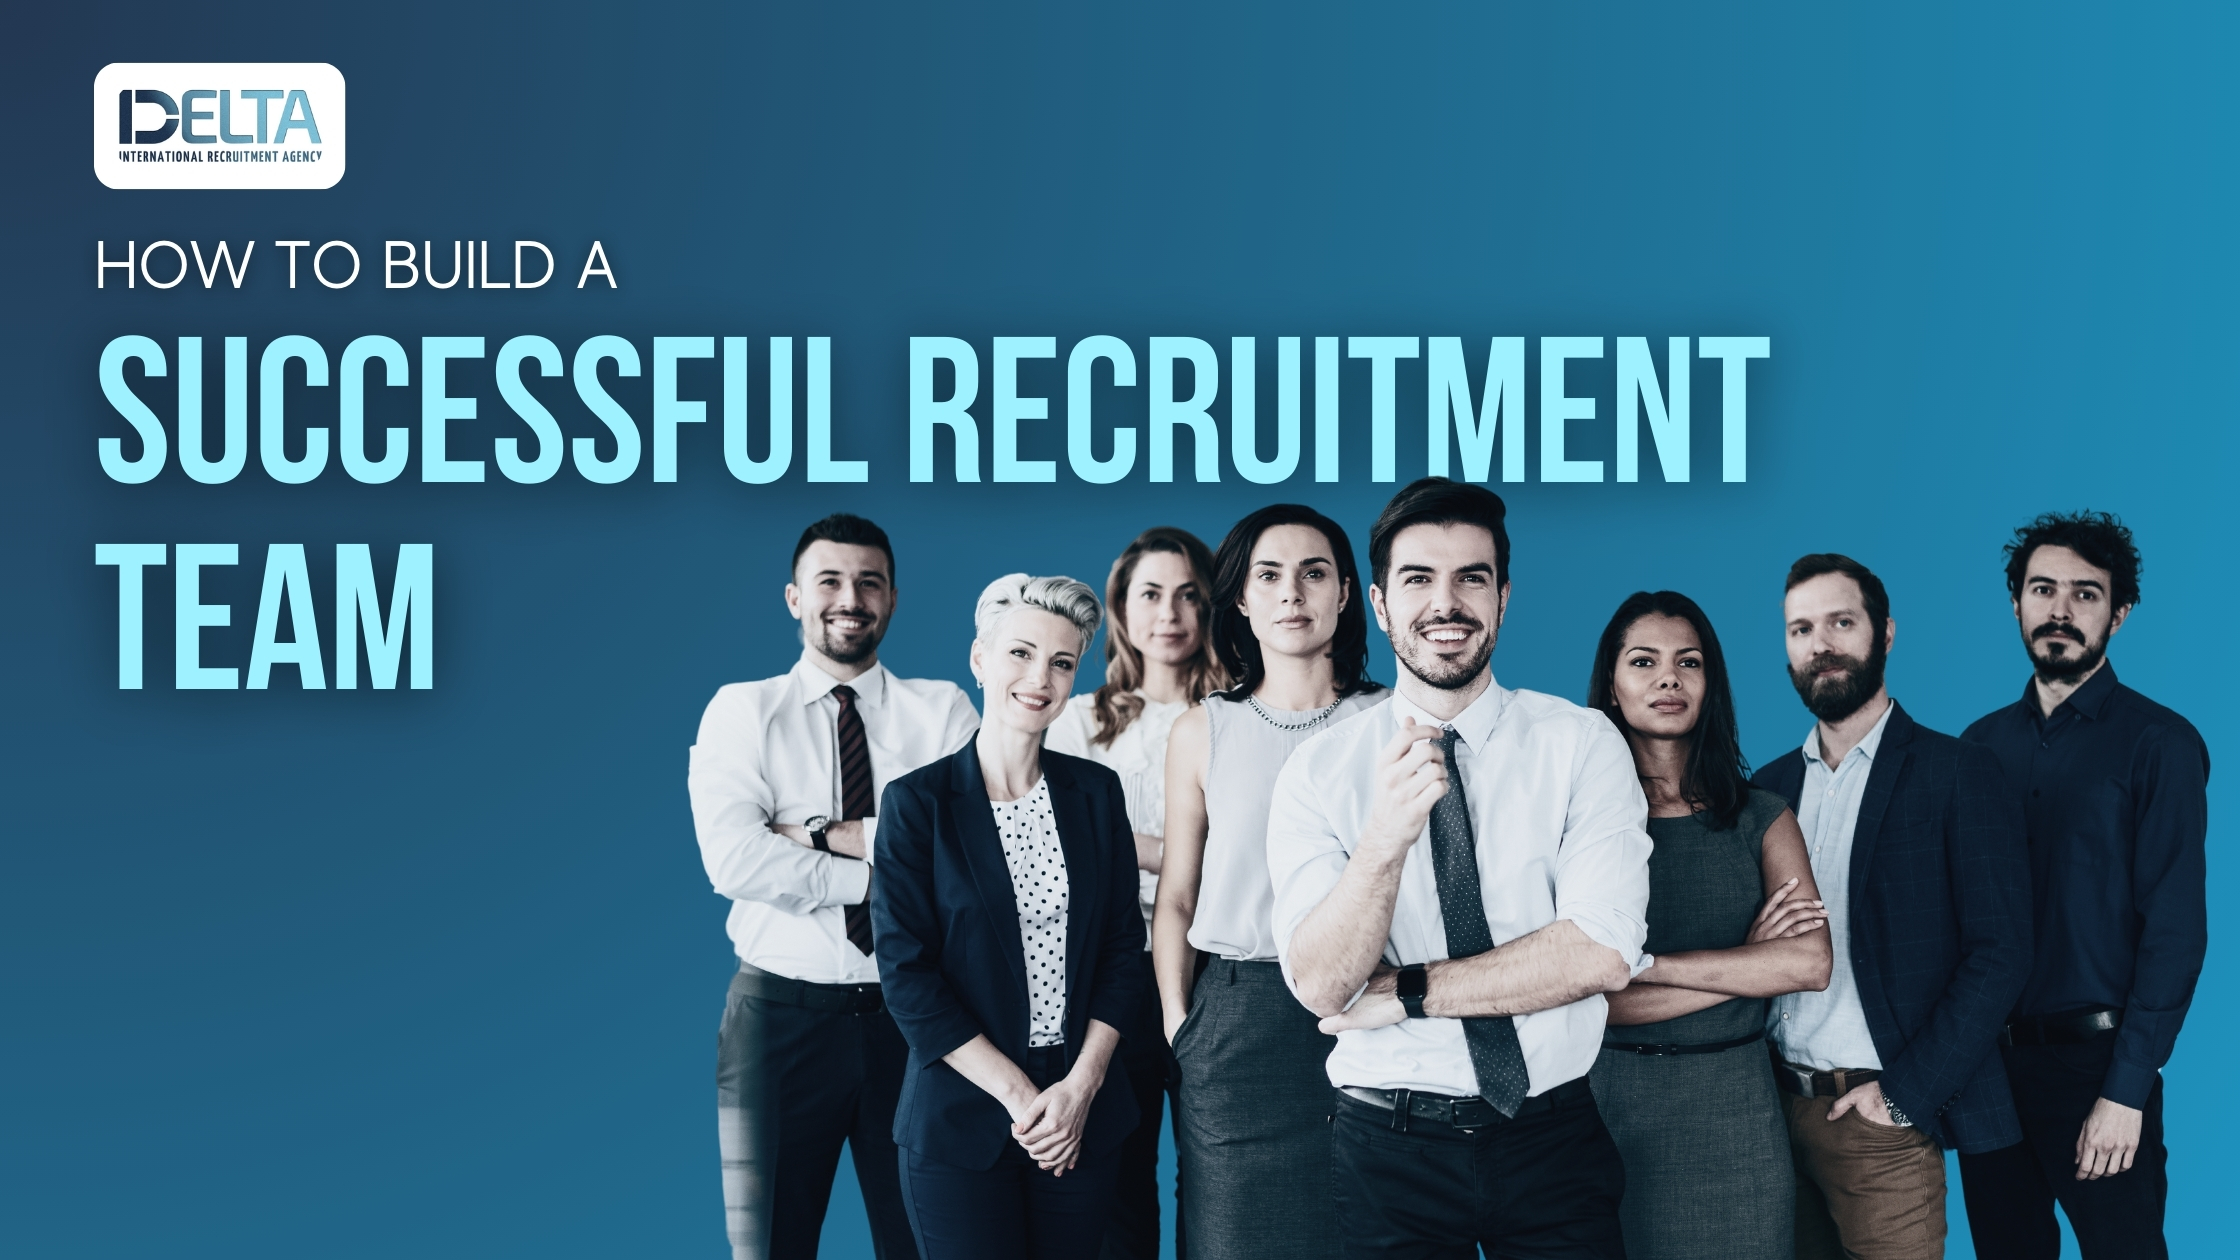 How to Build a Successful Recruitment Team